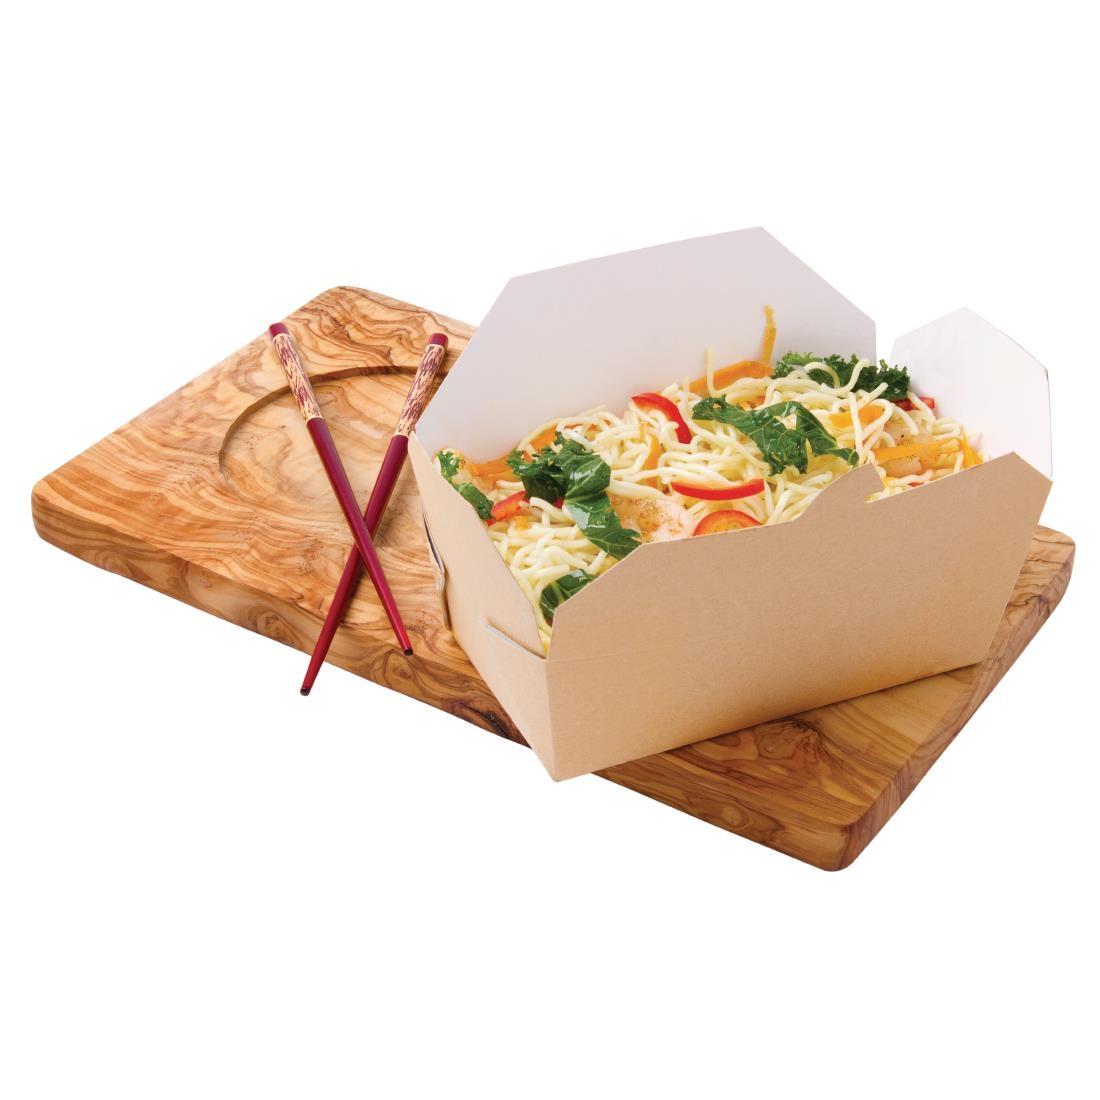 Colpac Recyclable Microwavable Food Boxes Rectangular 985ml / 34oz (Pack of 250) - DM173  - 5